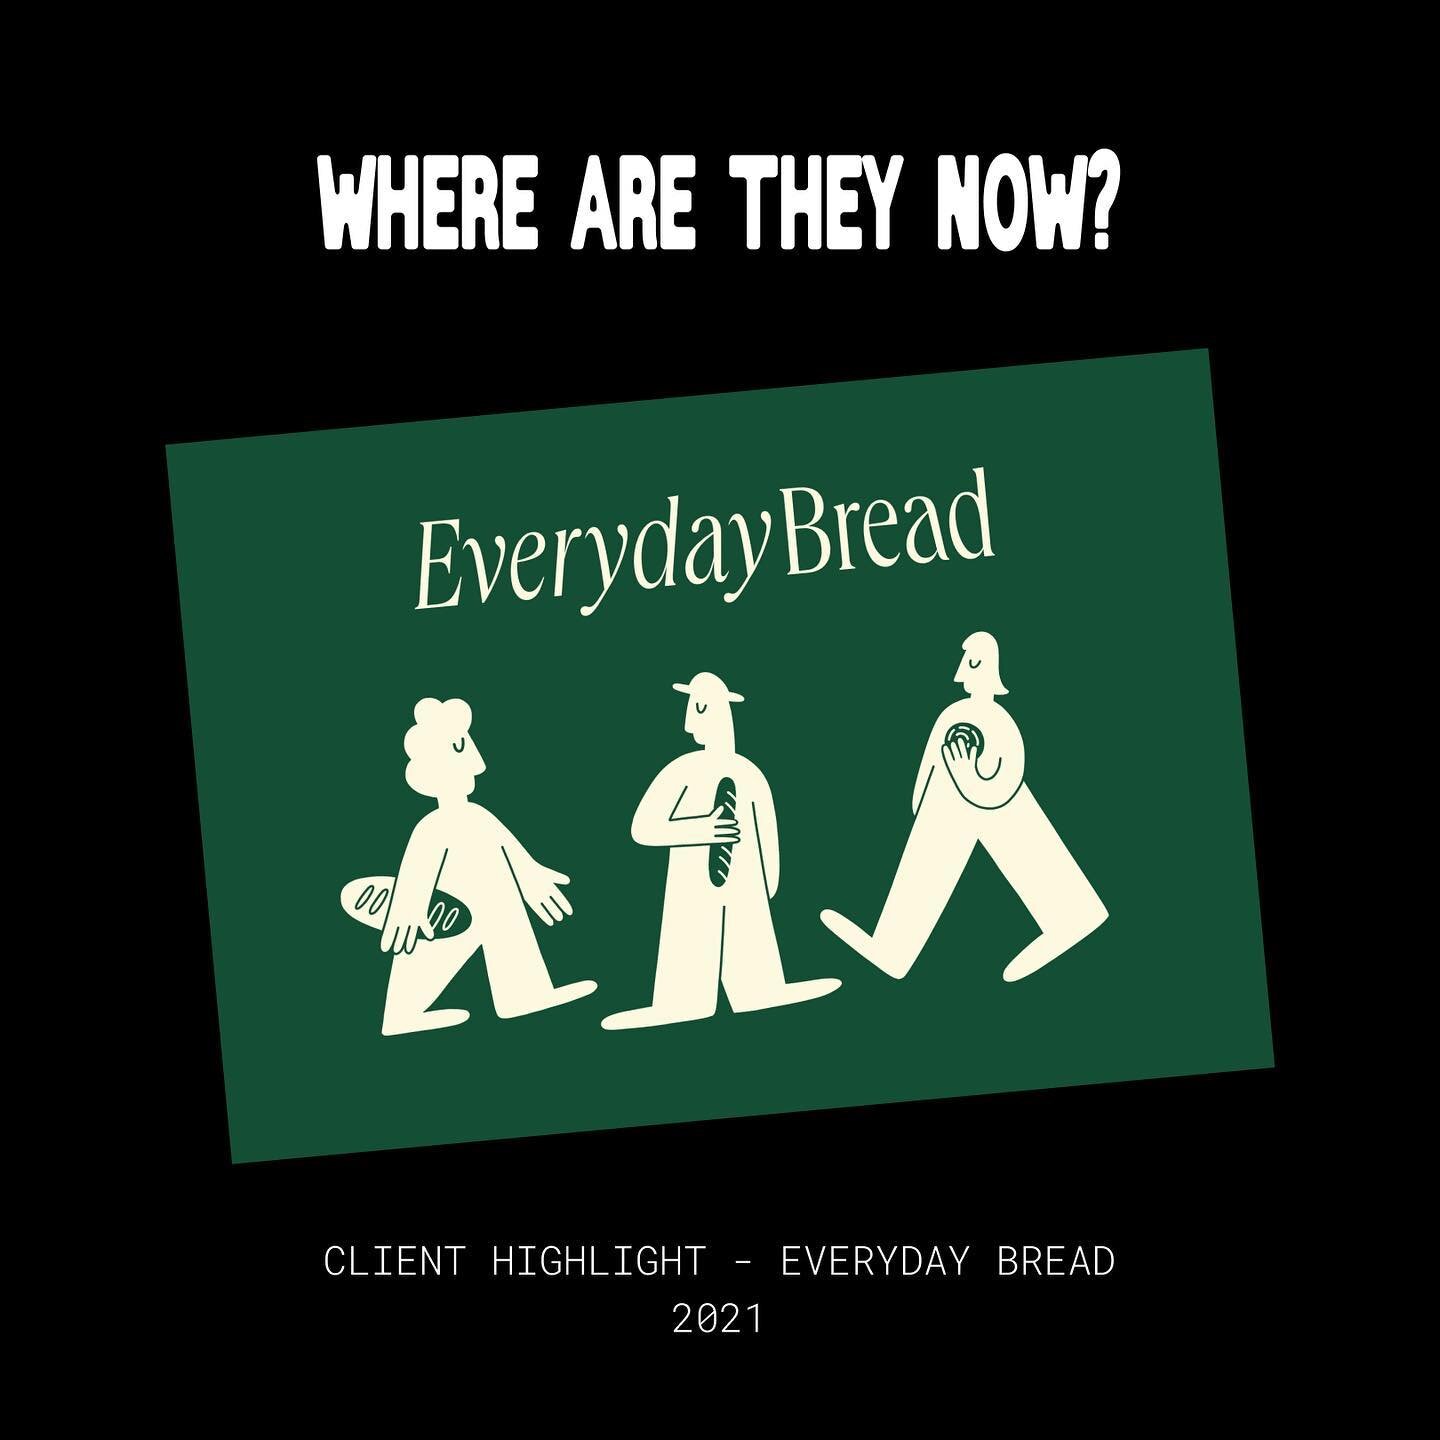 If you live in the Perth/Freo area and you don&rsquo;t know of @everyday__bread - have you been living under a rock or???

Not only the best bread around, but the best people behind the biz too. There&rsquo;s a reason they sellout every day with line